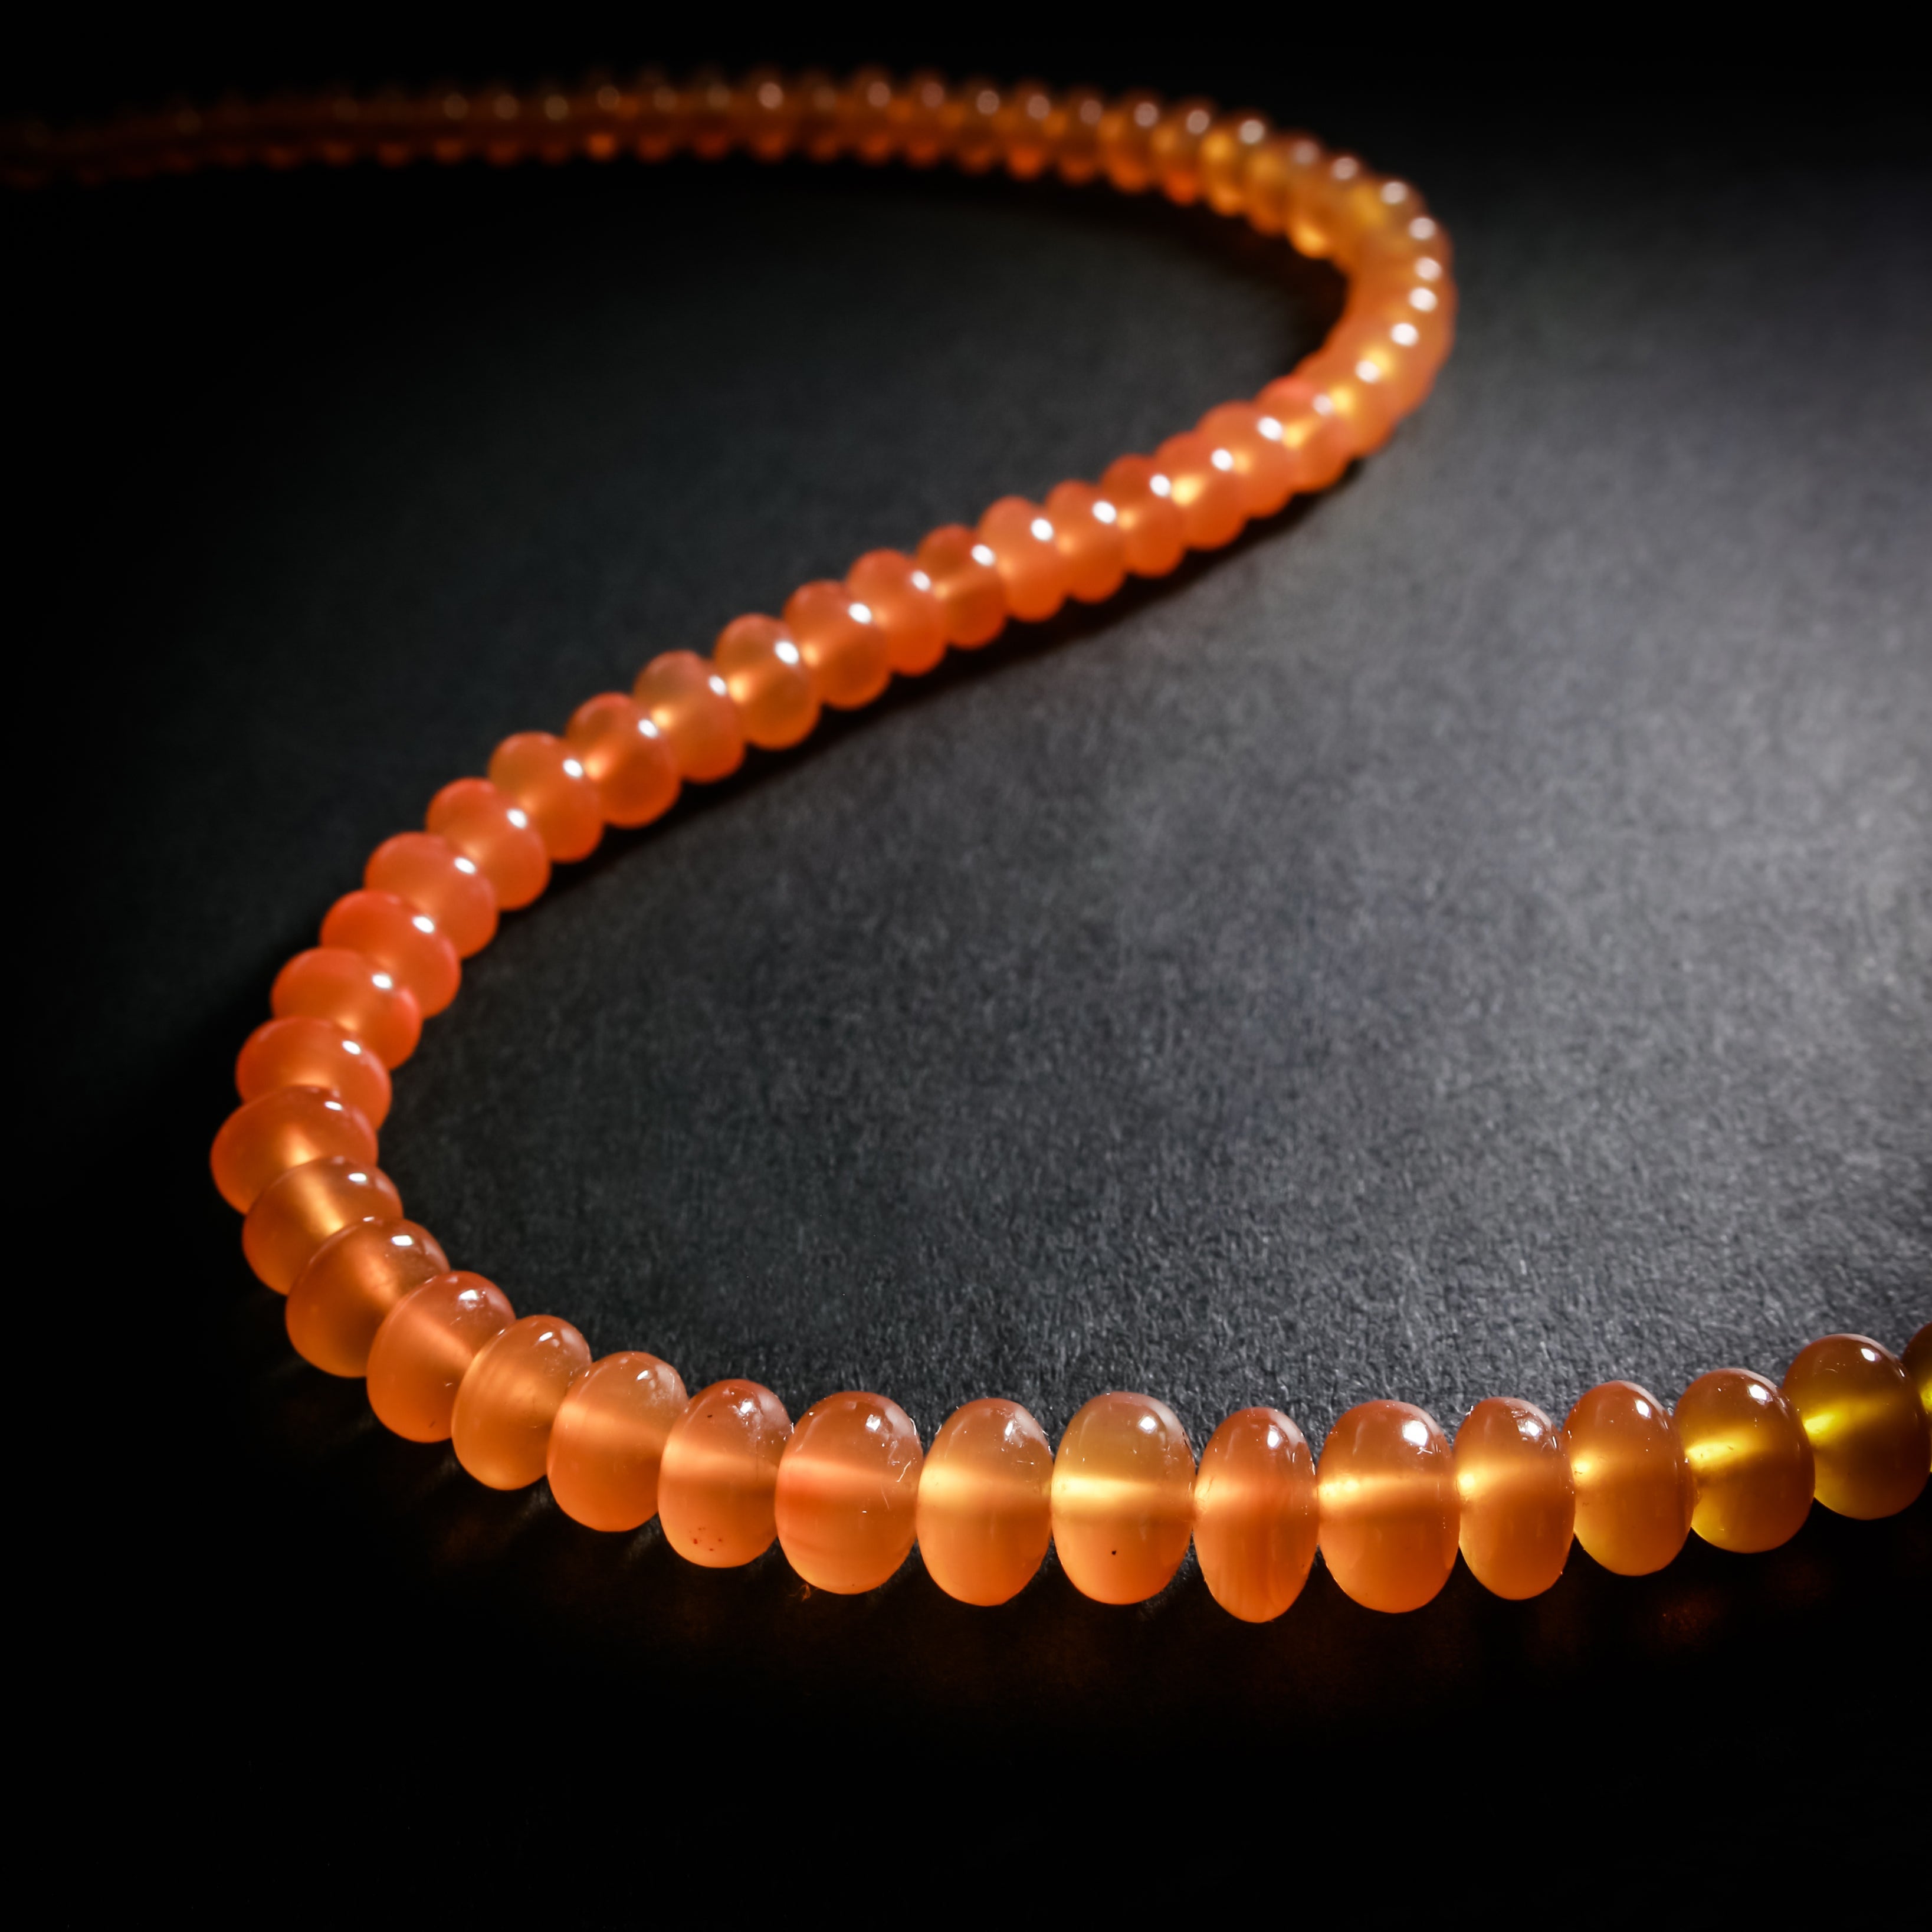 Crystal Healing Precious Carnelian necklace known for increasing optimism, vitality, joy